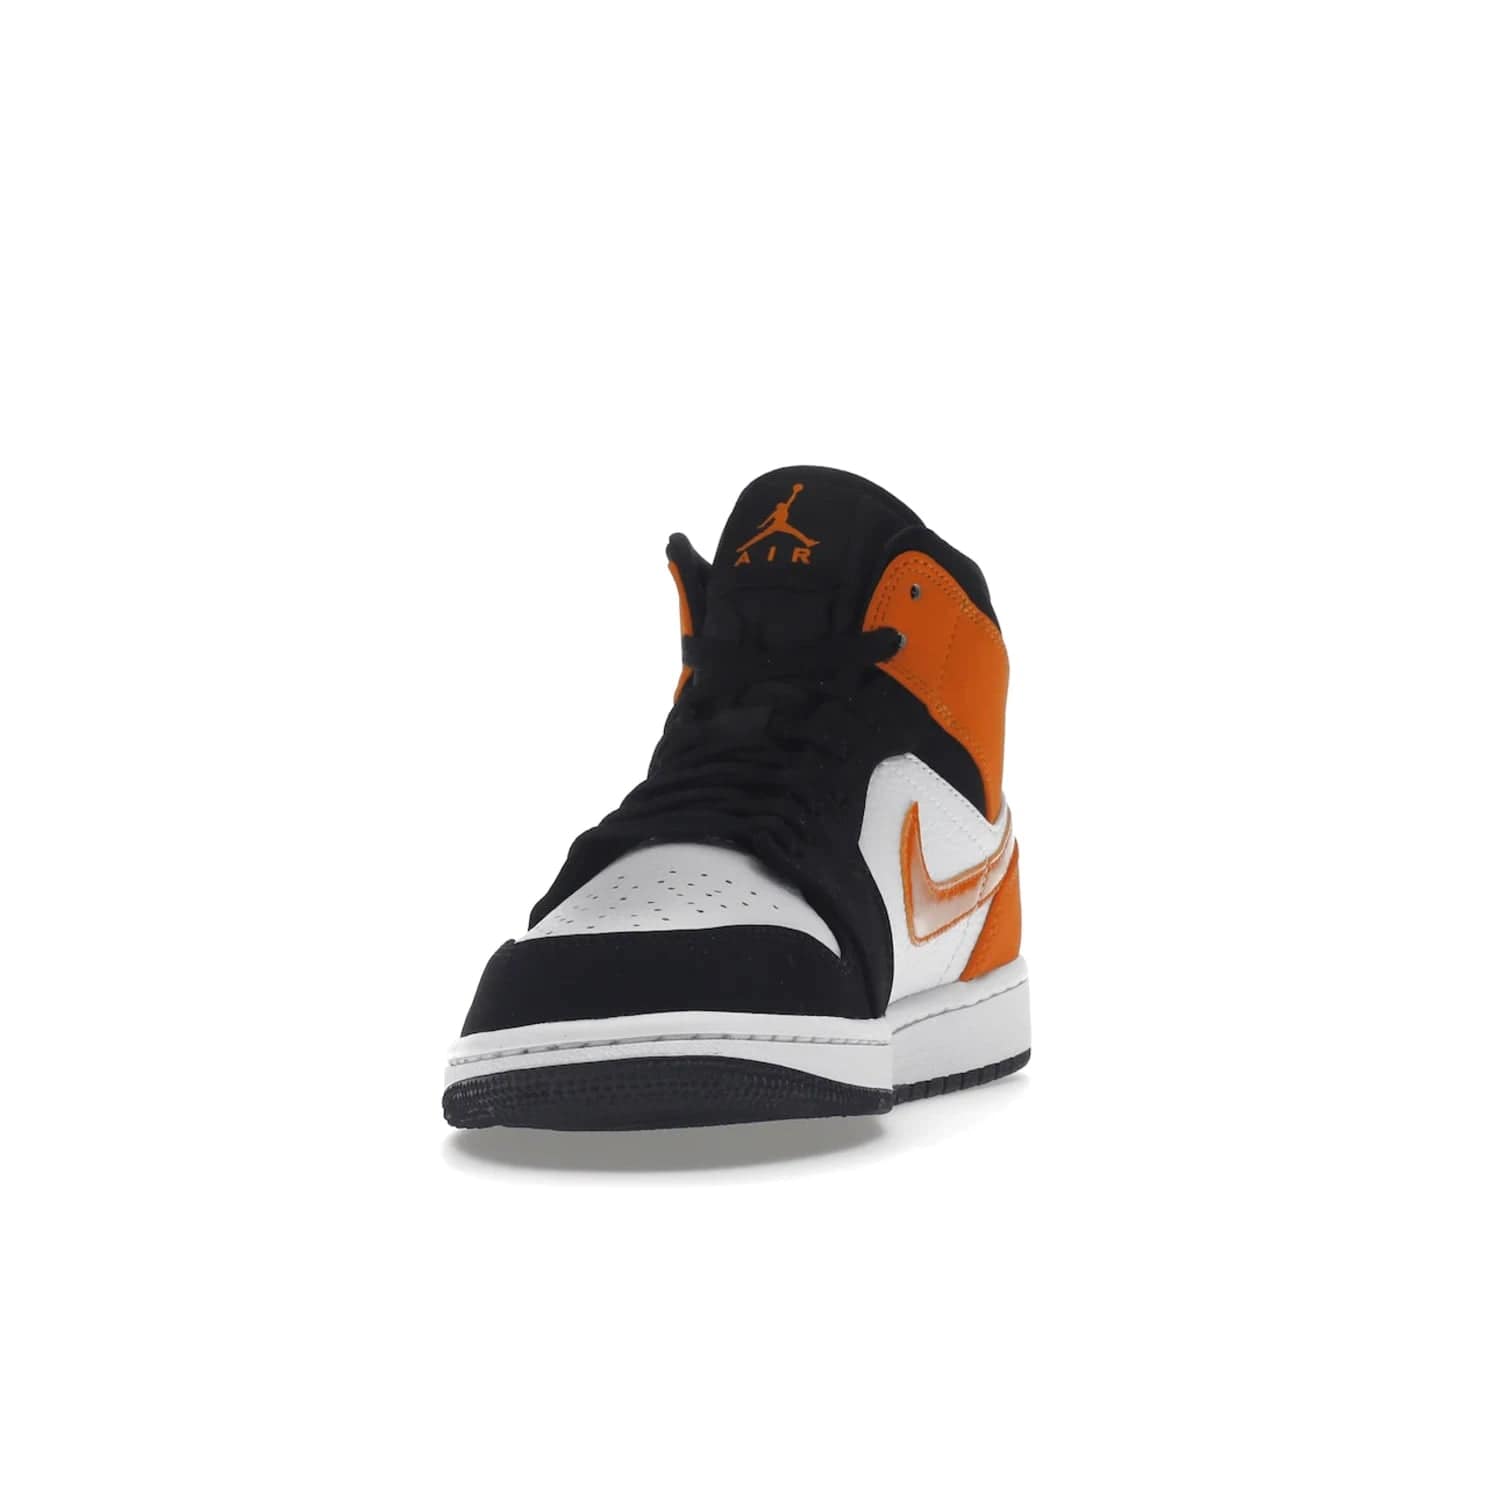 Jordan 1 Mid Shattered Backboard - Image 12 - Only at www.BallersClubKickz.com - The Air Jordan 1 Mid Shattered Backboard offers a timeless Black/White-Starfish colorway. Classic Swoosh logo and AJ insignia plus a shatterd backboard graphic on the insole. Get your pair today!